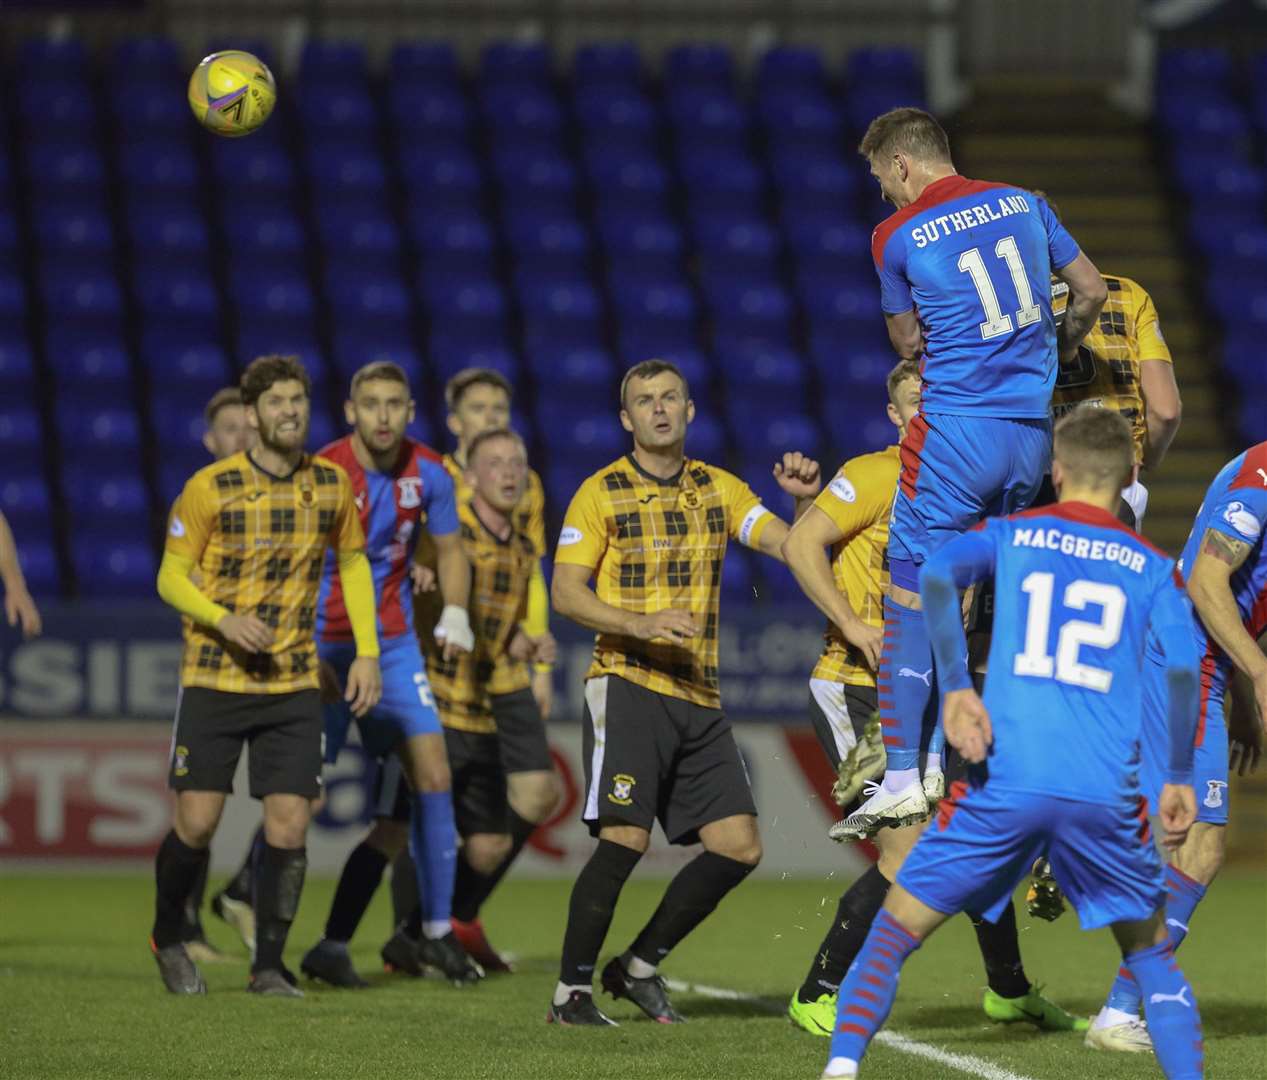 Shane Sutherland scores the winning goal against East Fife. Picture: Ken Macpherson